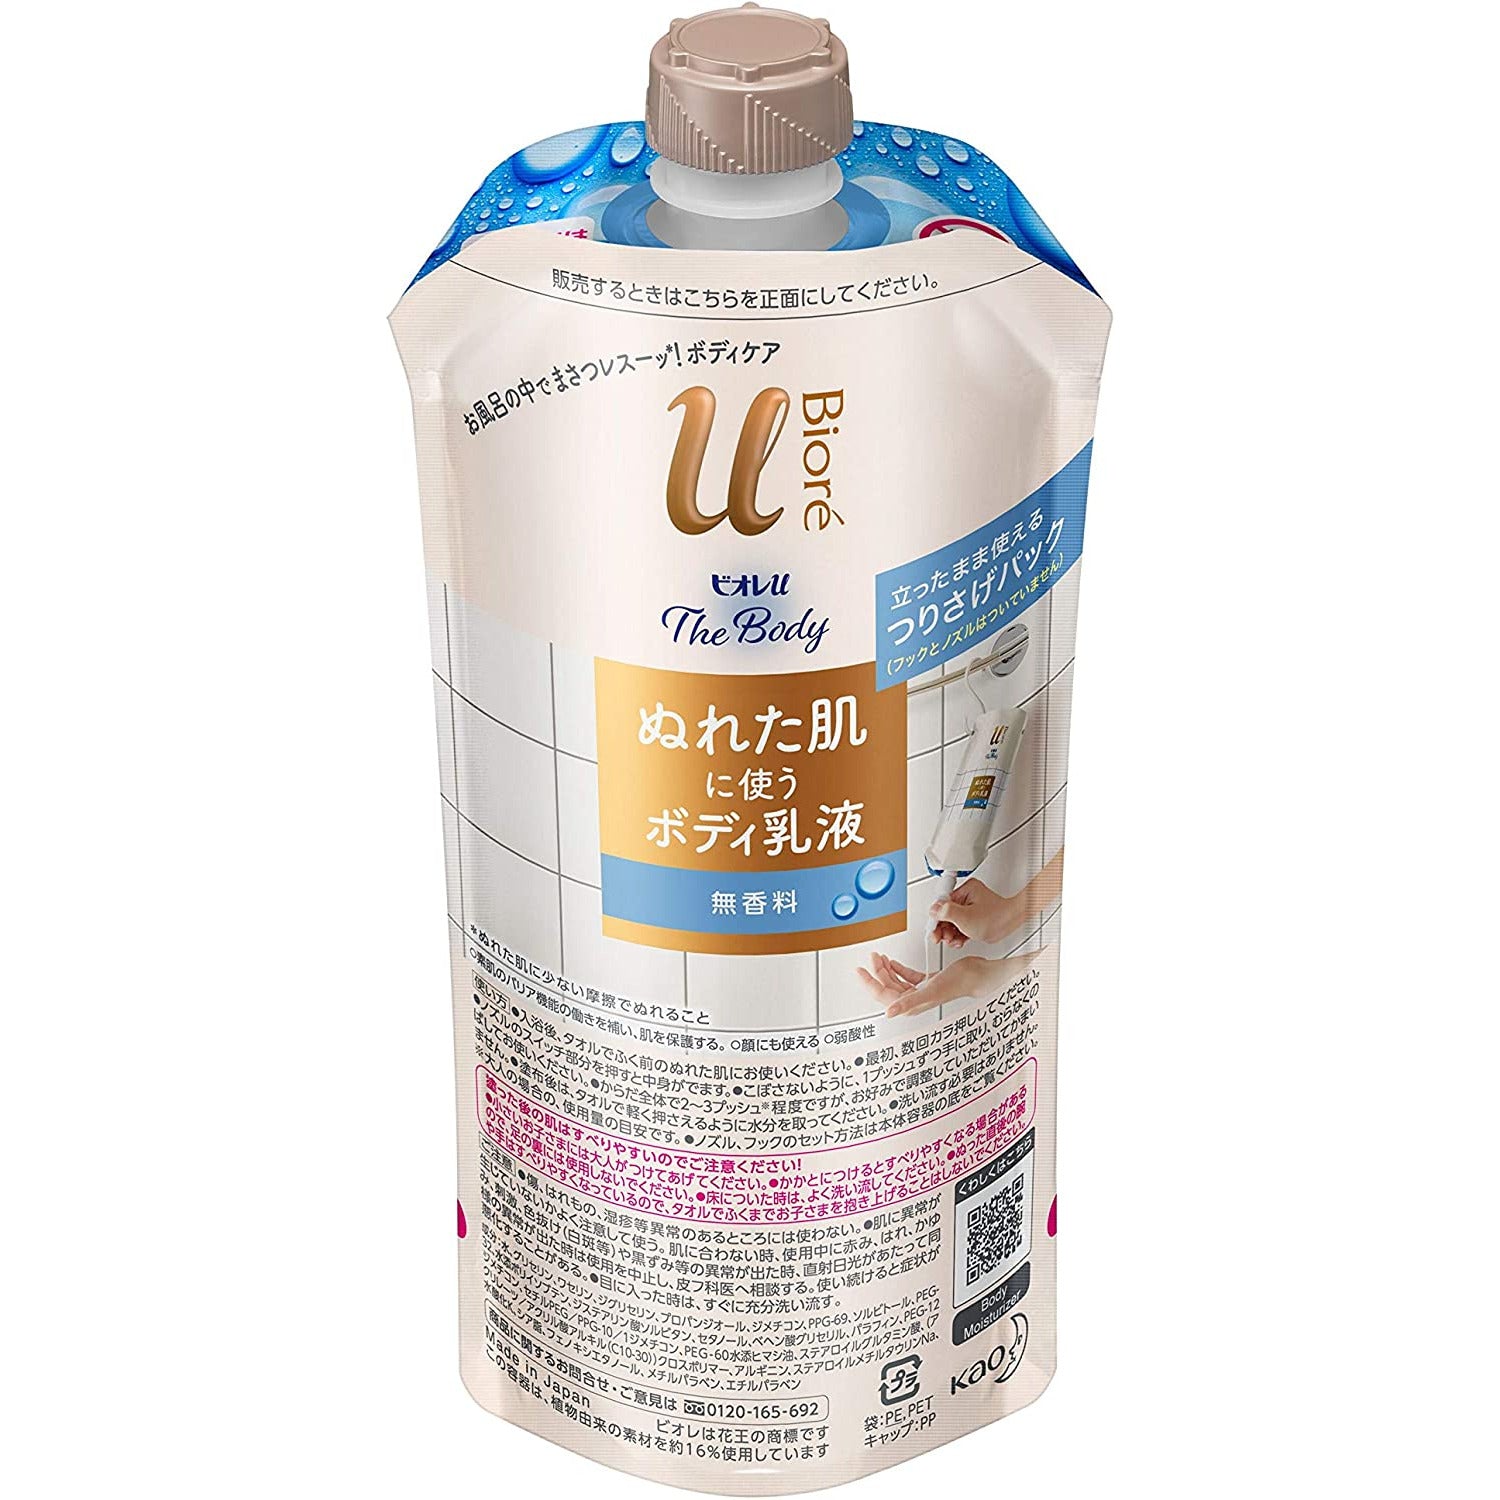 Kao Biore U The Body / Body emulsion for wet skin fragrance-free suspended pack 300ml